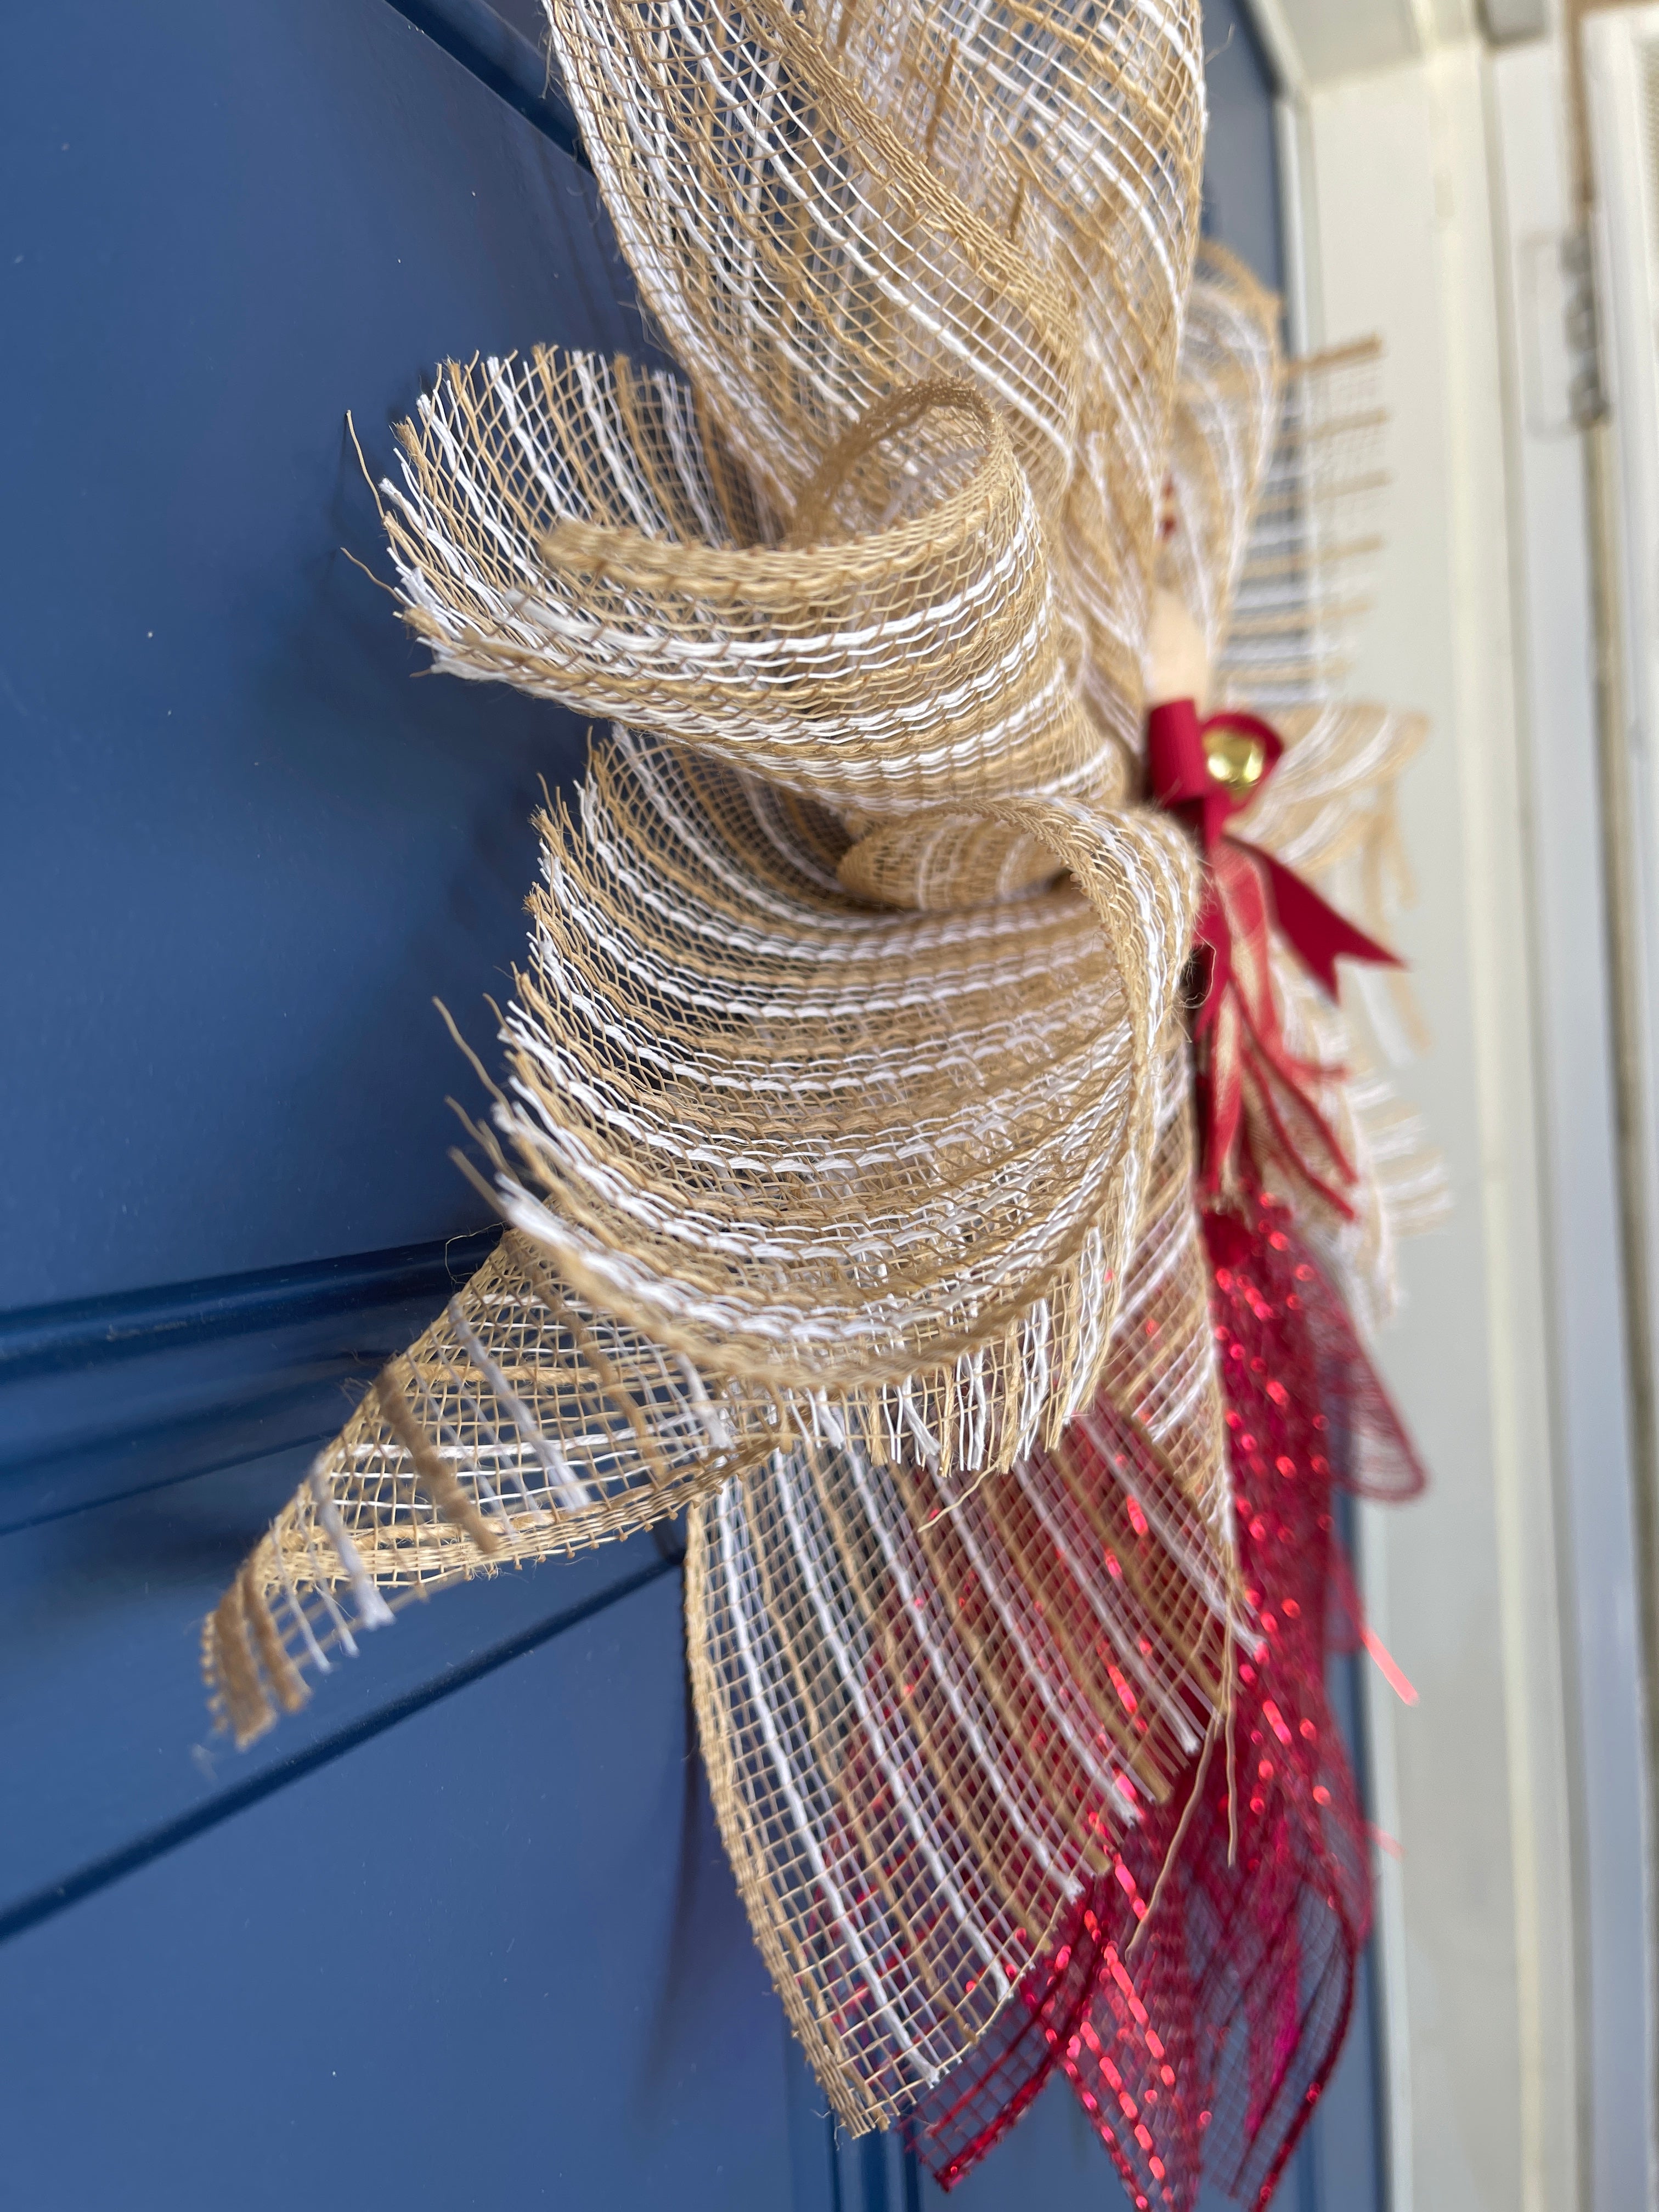 Side View of Rustic Farmhouse Jute Burlap and Red Metallic Angel Tree Topper with Red and Tan Plaid Apron, Red Bow, Gold Bell and Wooden Head on a Blue Door